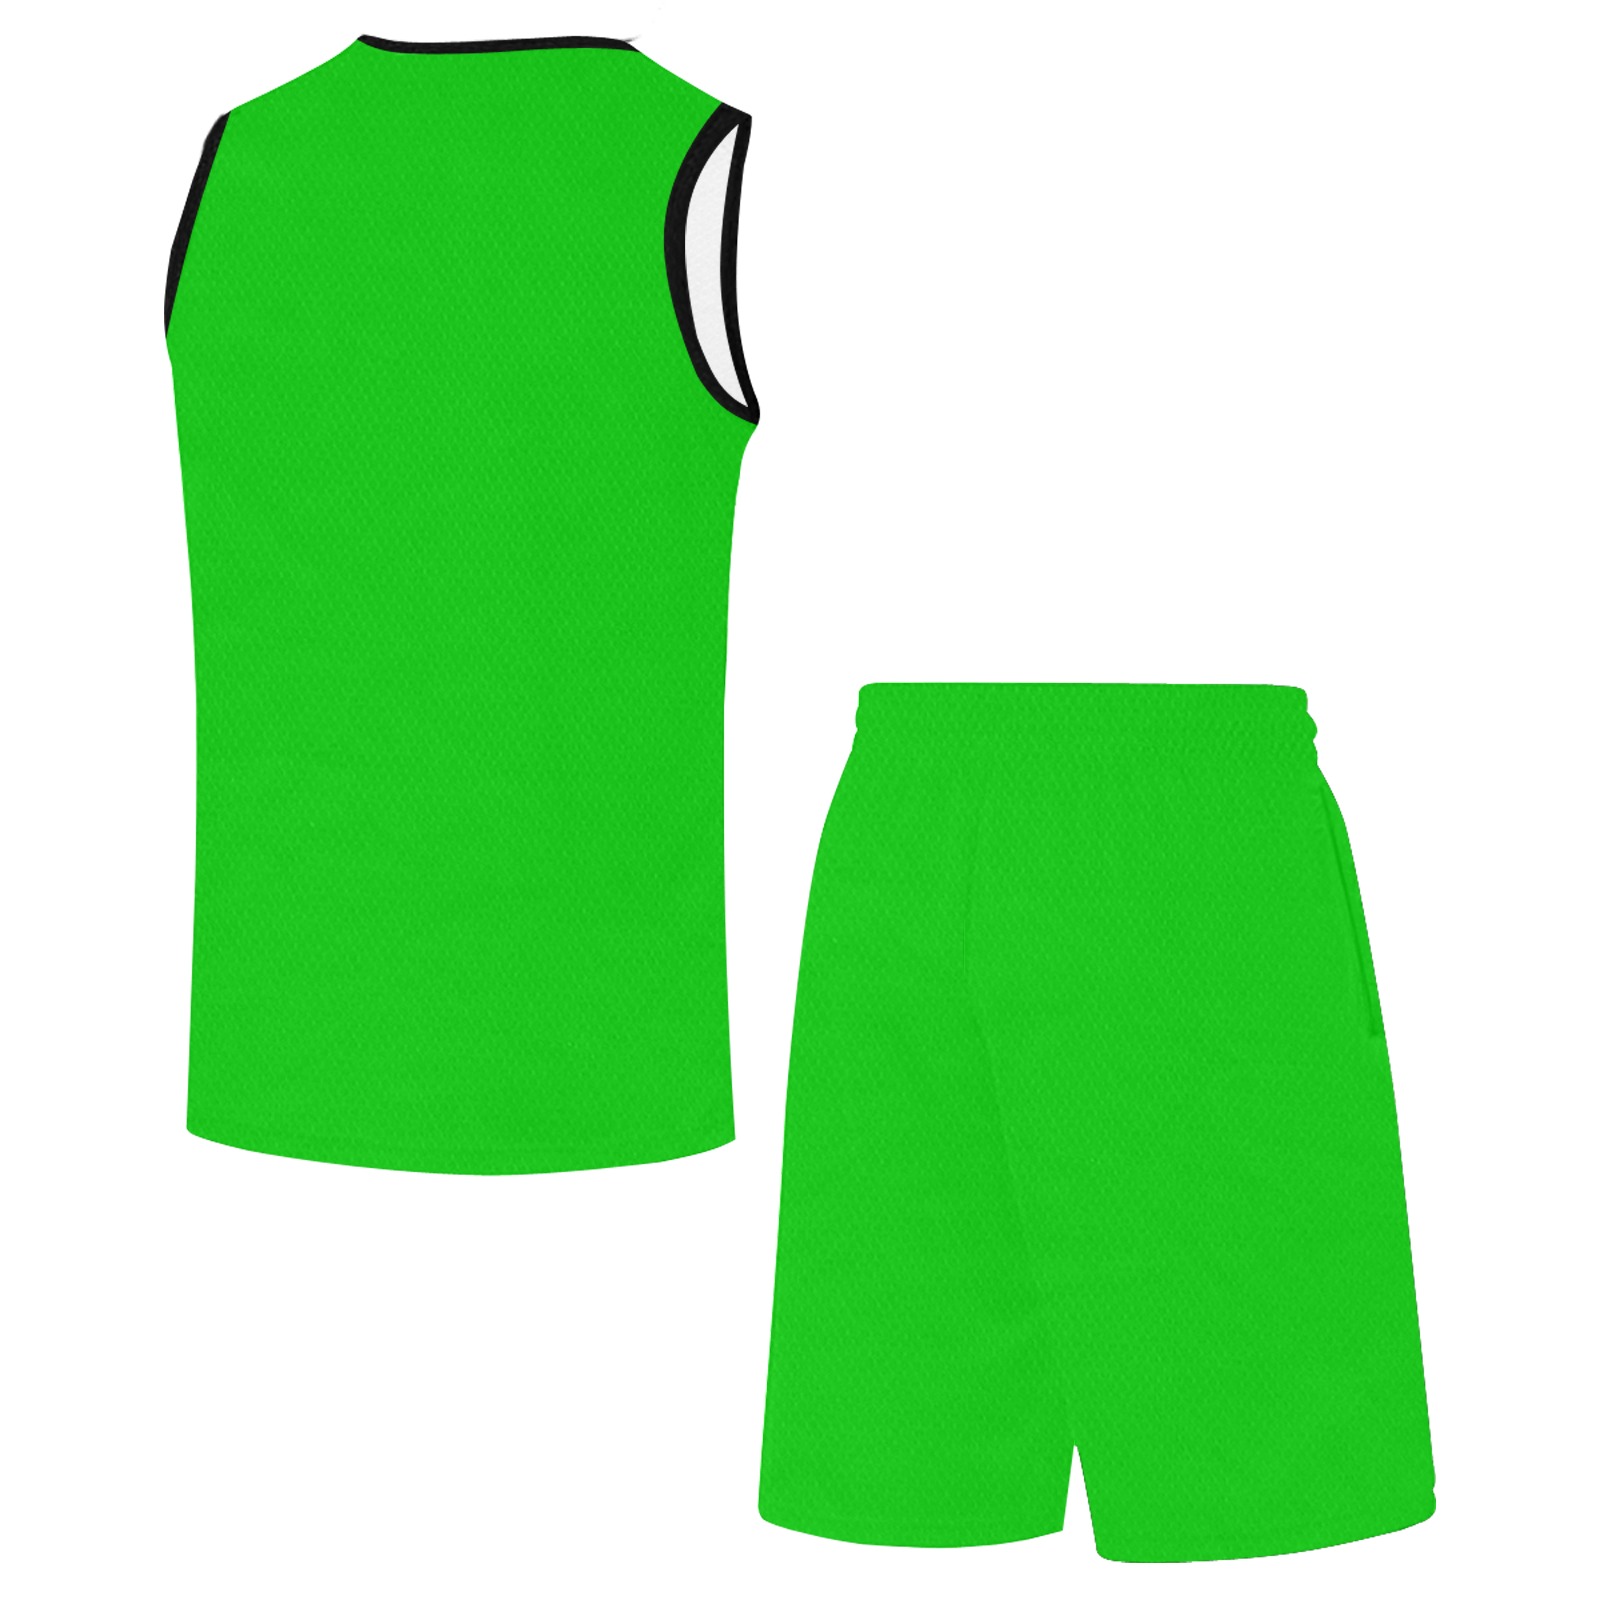 Merry Christmas Green Solid Color Basketball Uniform with Pocket